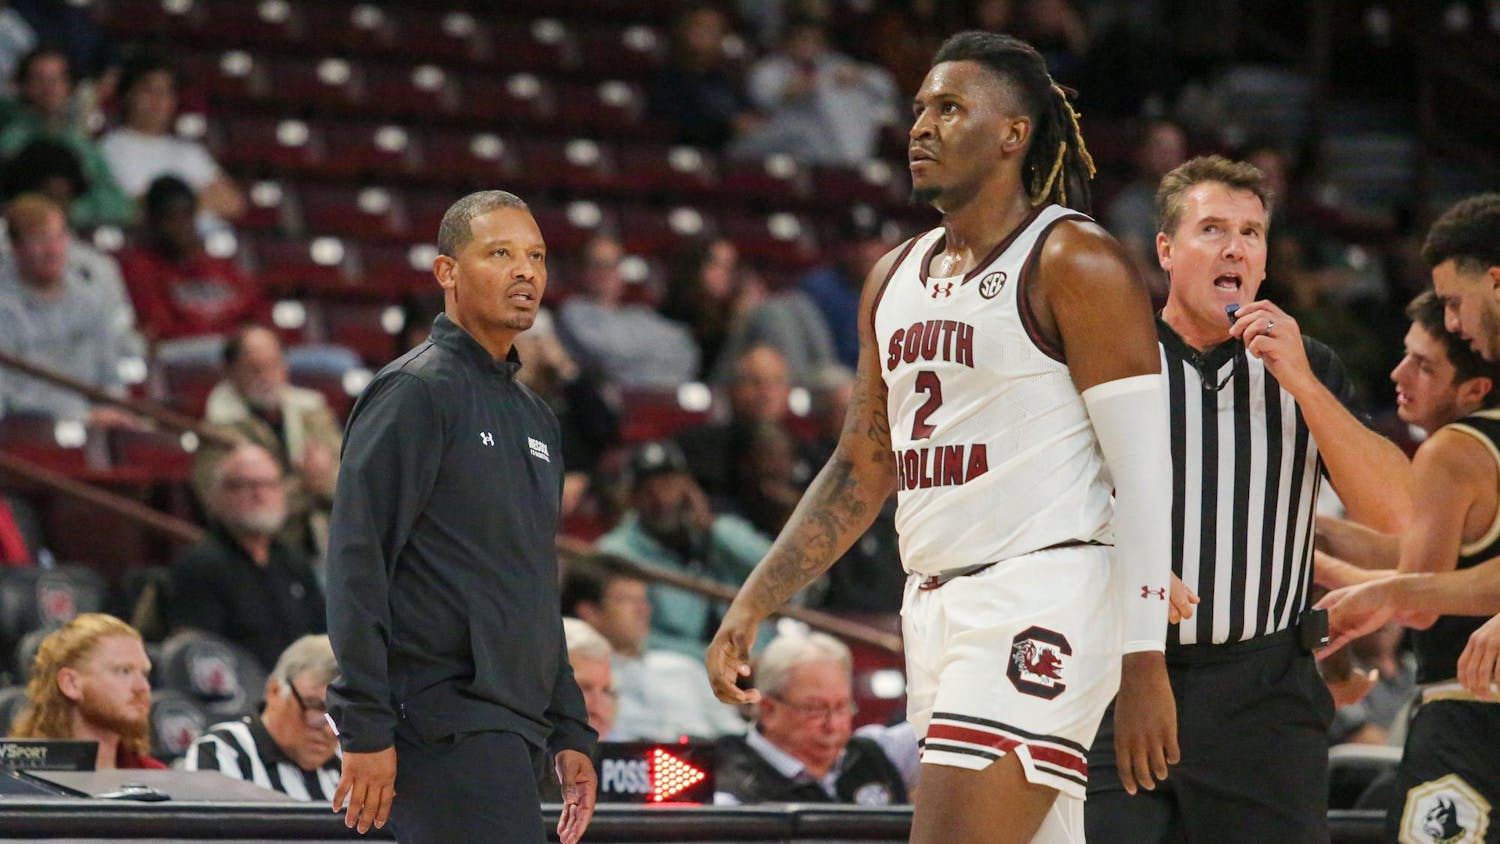 FILE - Head coach Lamont Paris watches graduate ɫɫƵ forward B.J. Mack during South Carolina’s exhibition game against Wofford at Colonial Life Arena on Nov. 1, 2023. The ɫɫƵs fell to the Auburn Tigers 86-55 in the quarterfinals of the SEC Tournament on March 15, 2024, where Mack led the team in scoring with 14 points.